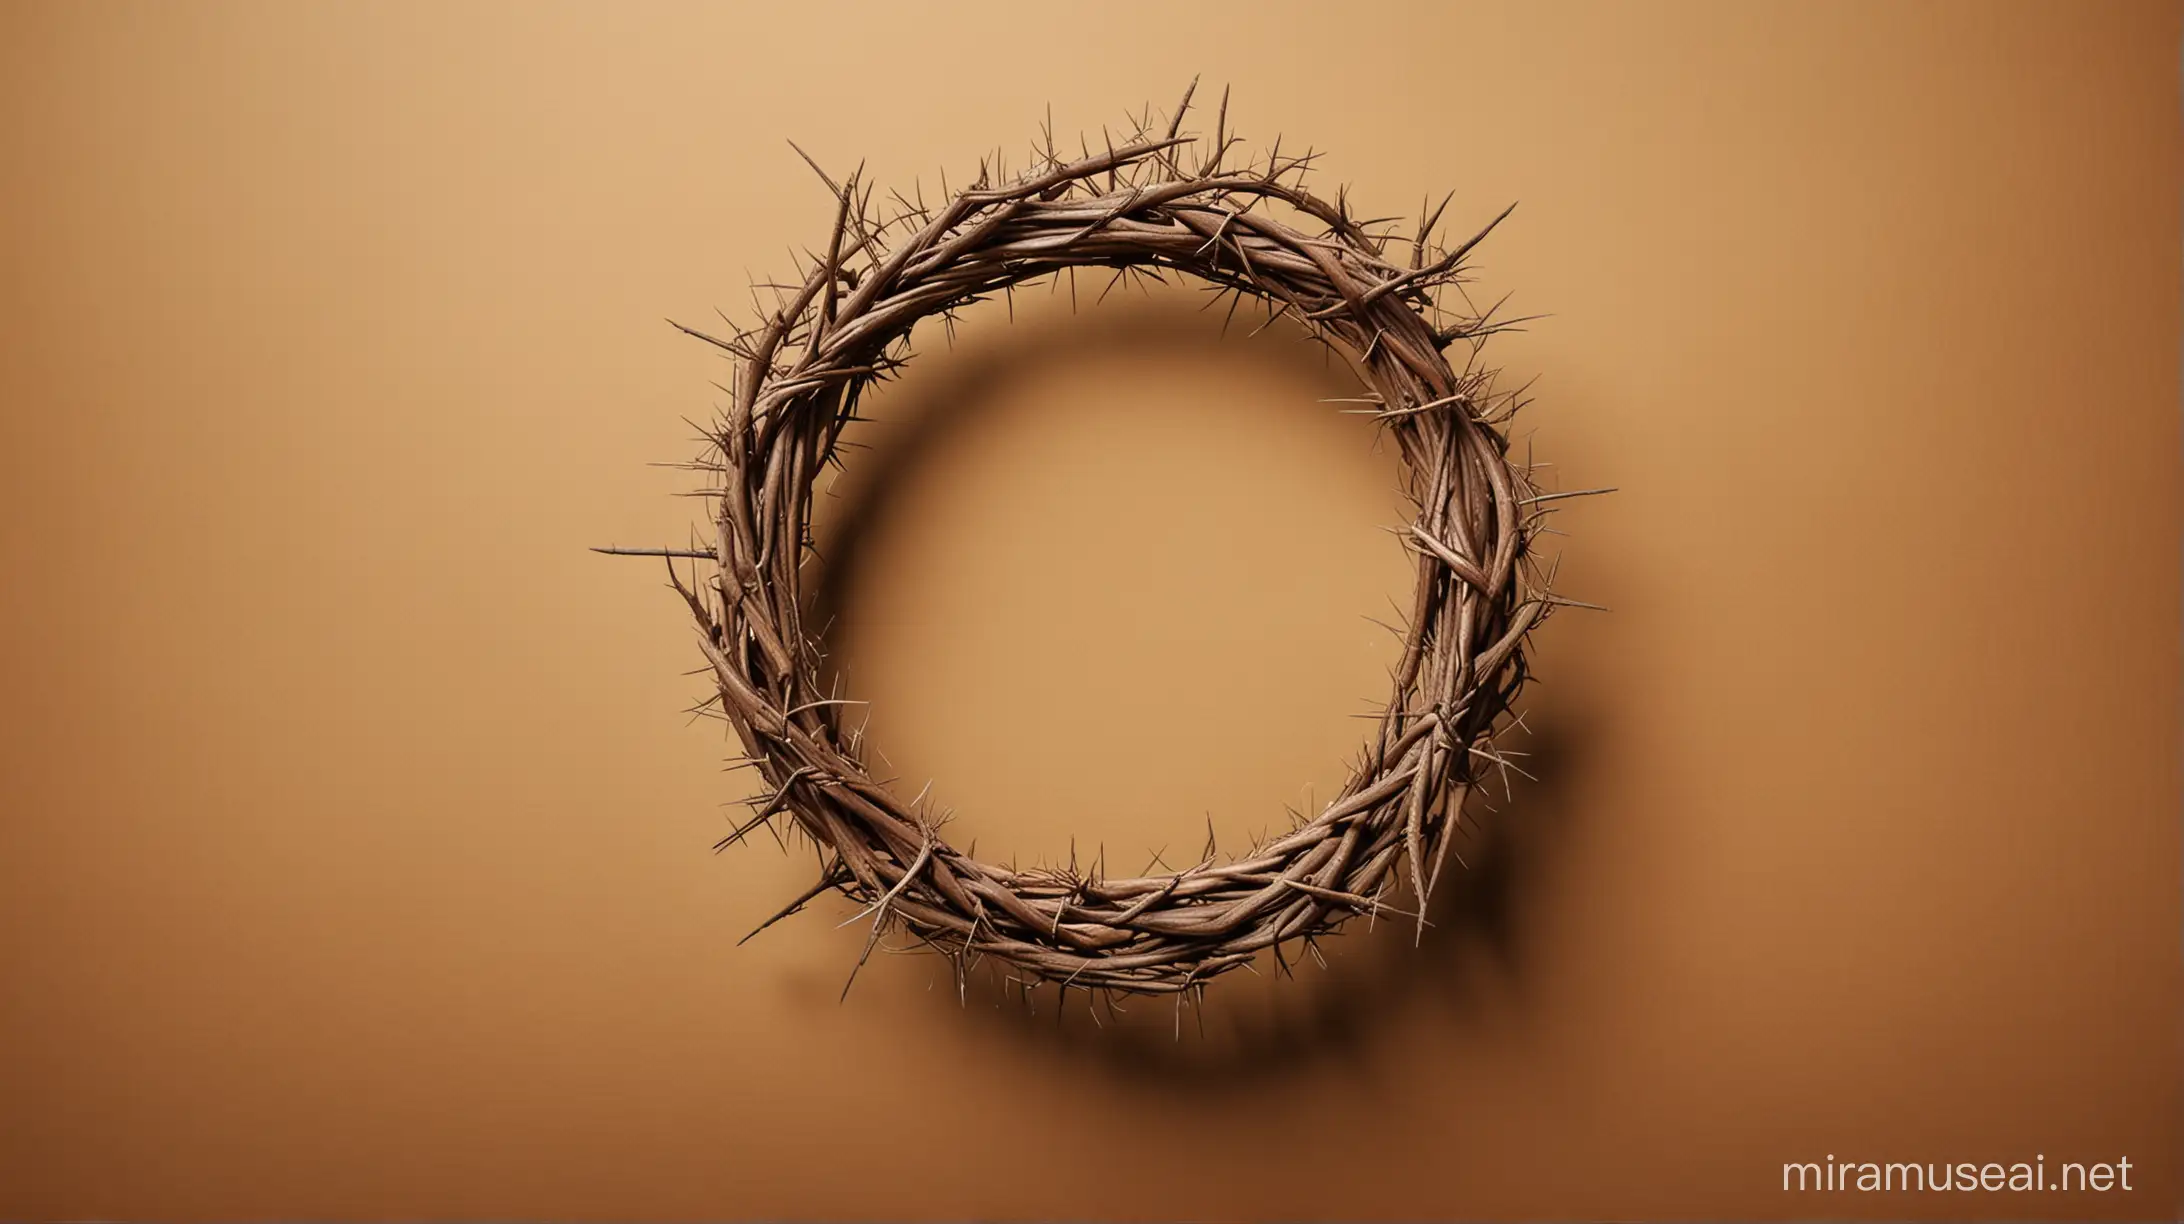 Religious Banner with Crown of Thorns on Brown Background